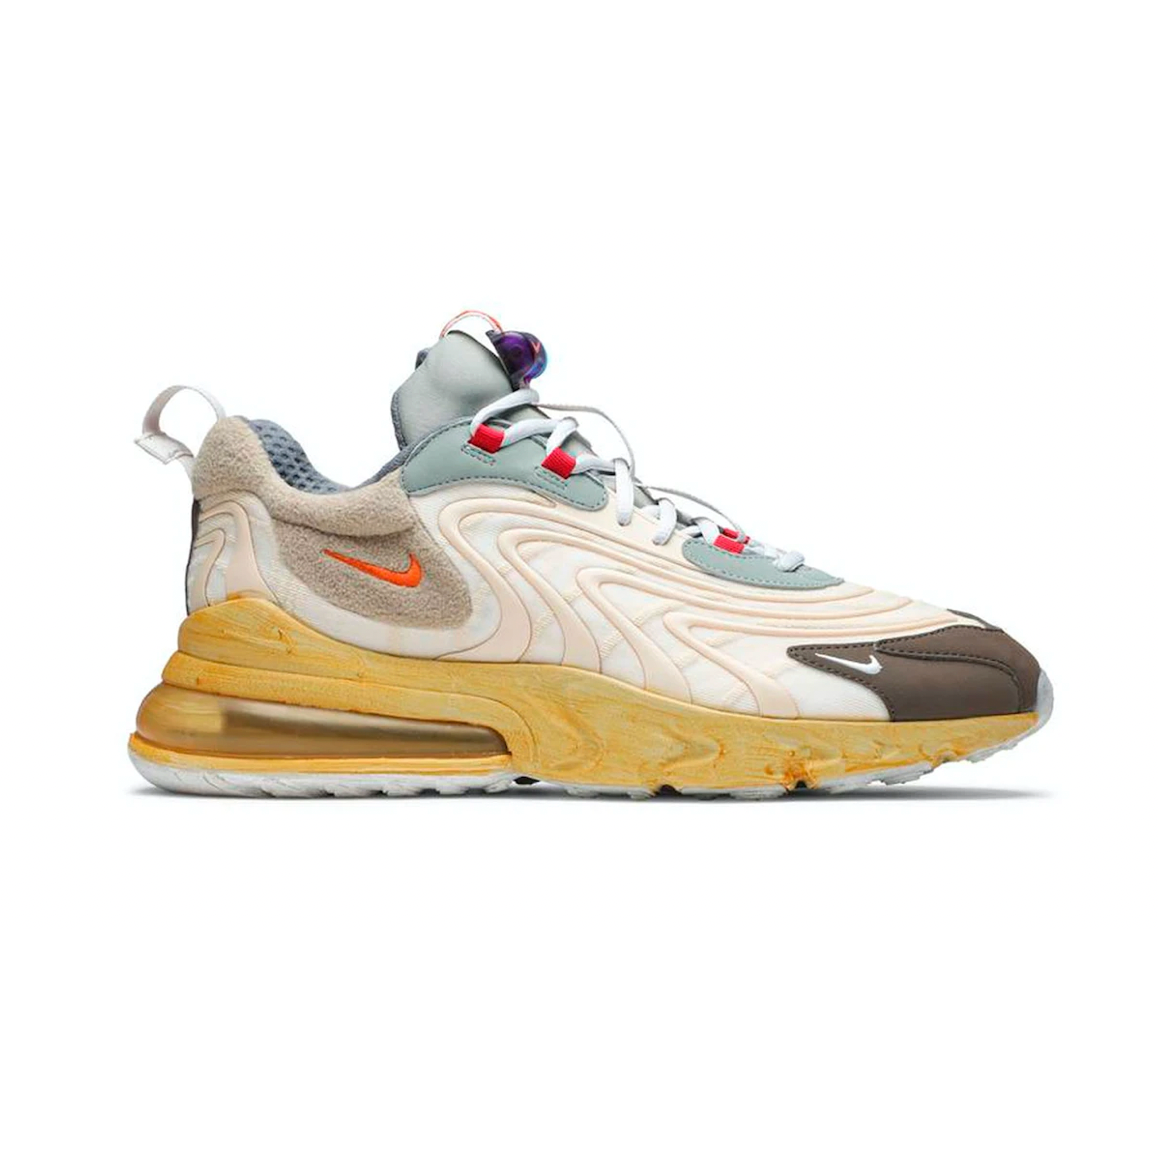 Nike Air Max 270 React ENG Travis Scott Cactus Trails from Nike